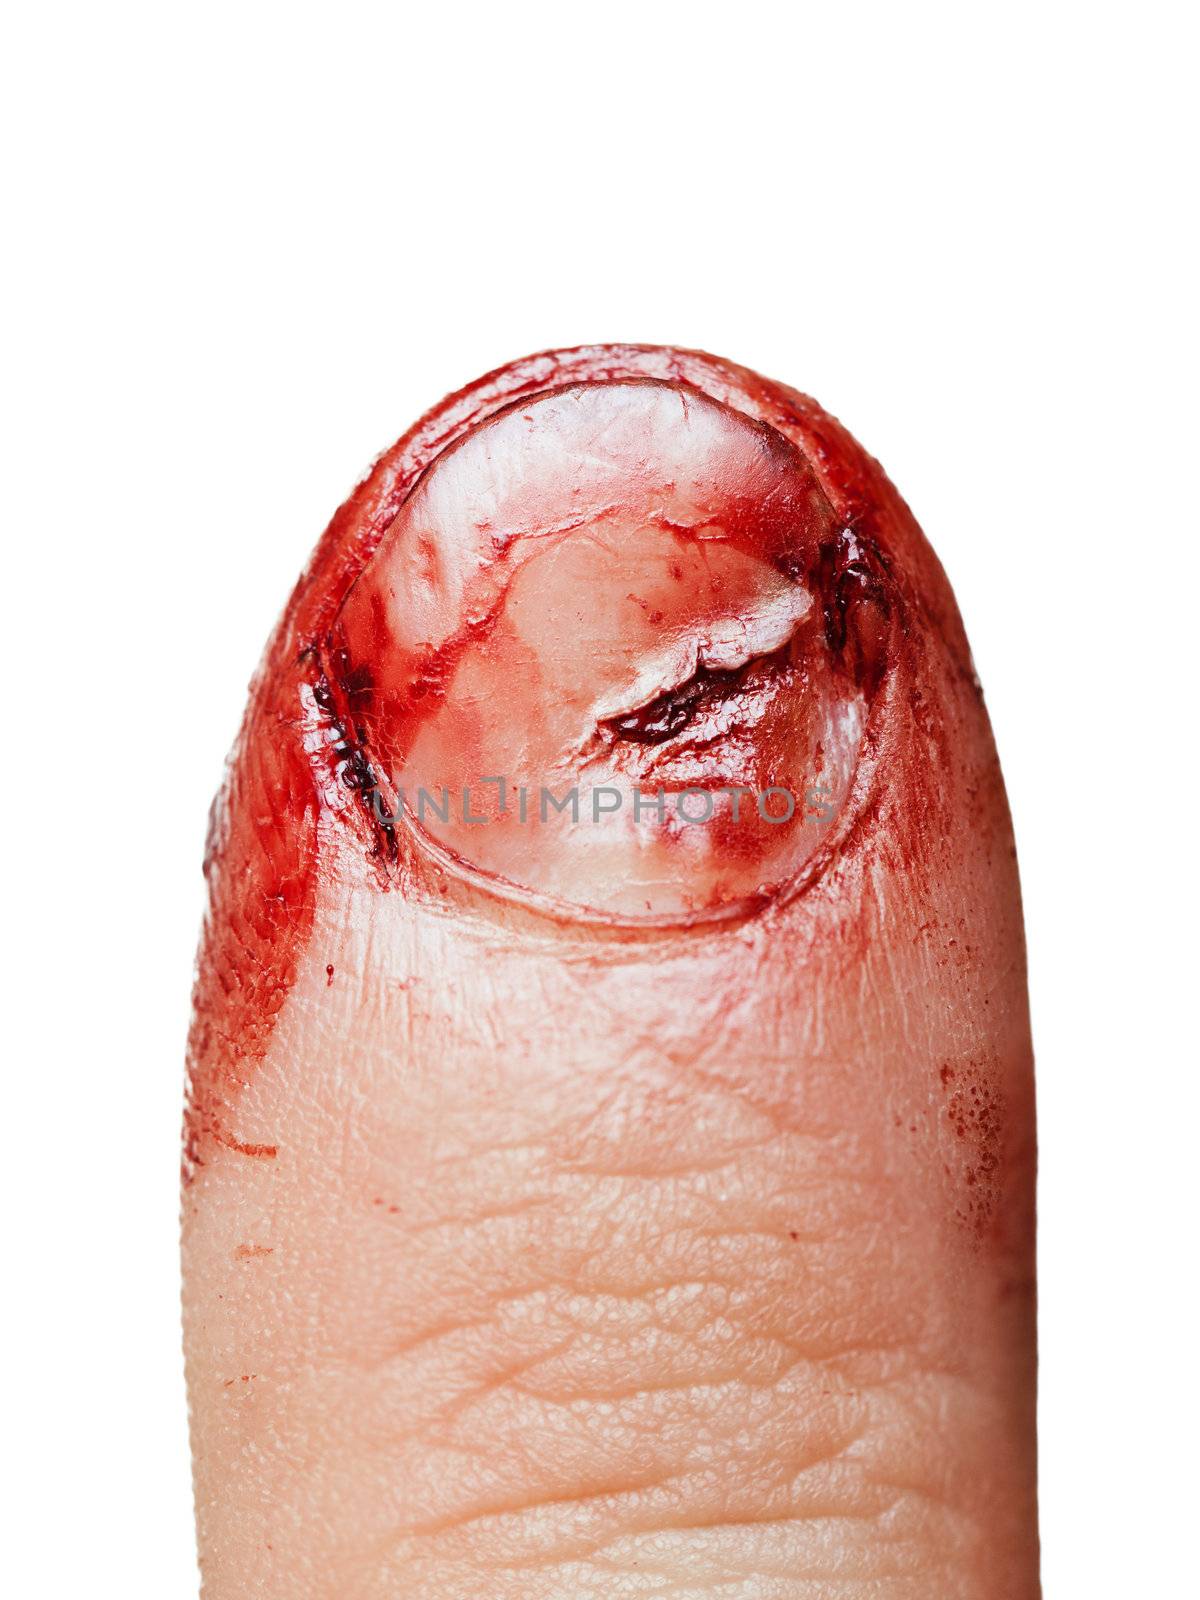 Blood wound finger nail by ia_64